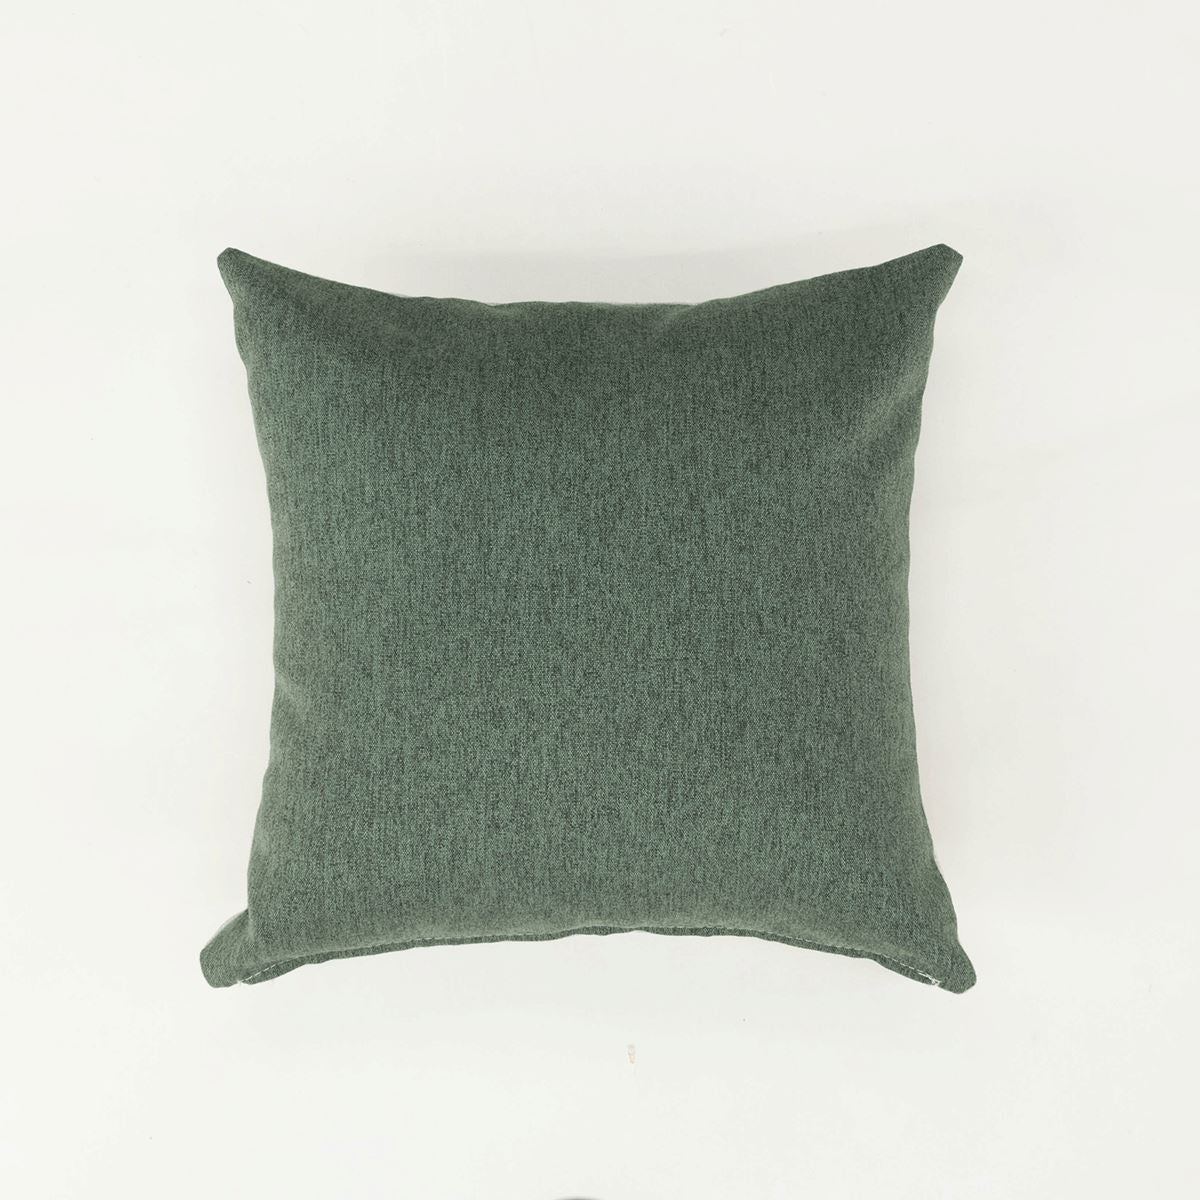 Two-tone Cushion Cover / ツートーンクッションカバー